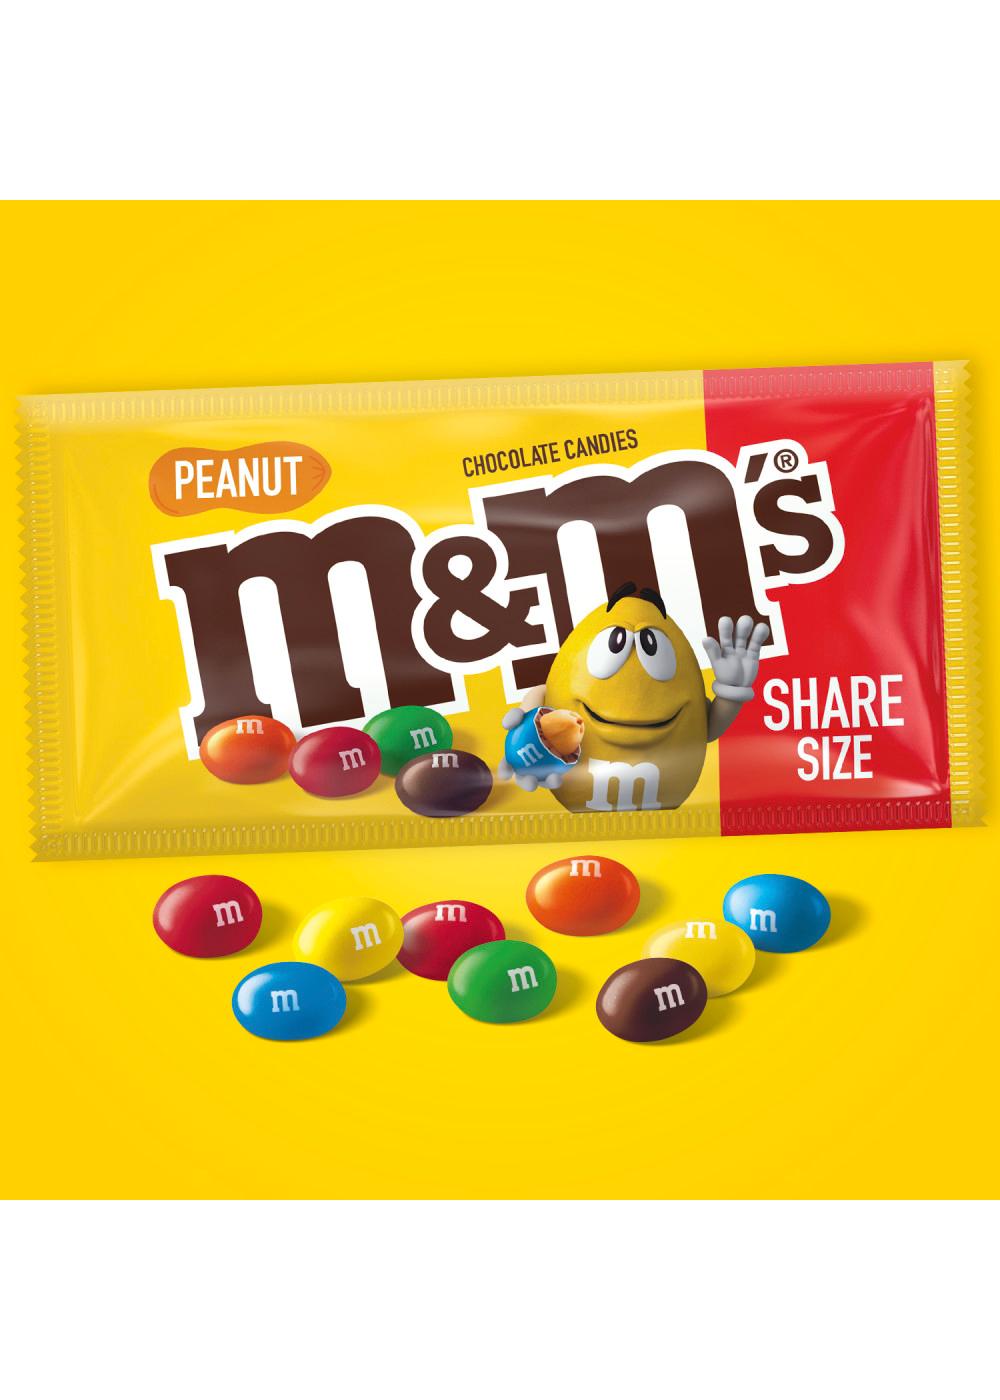 M&M's Red, White & Blue Patriotic Peanut Chocolate Candy Sharing Size -  Shop Candy at H-E-B